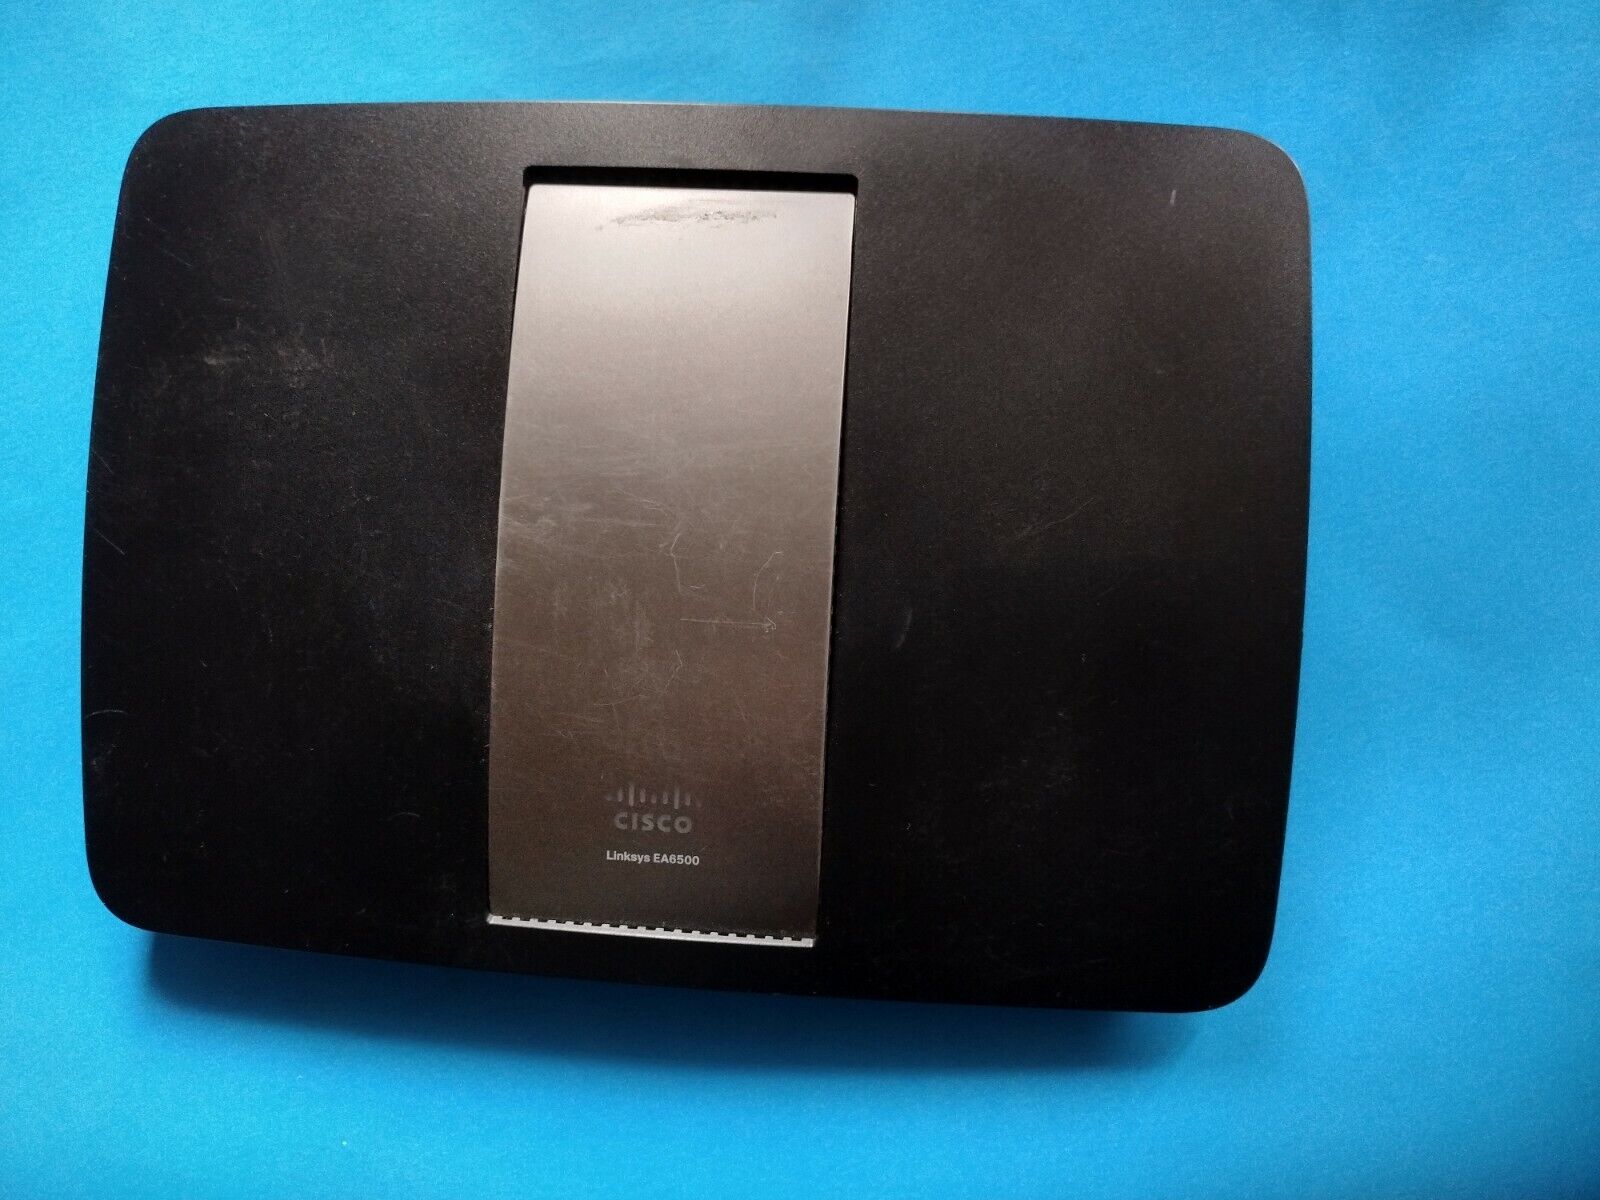 CISCO LINKSYS EA6500 DUAL-BAND WIRELESS ROUTER Tested